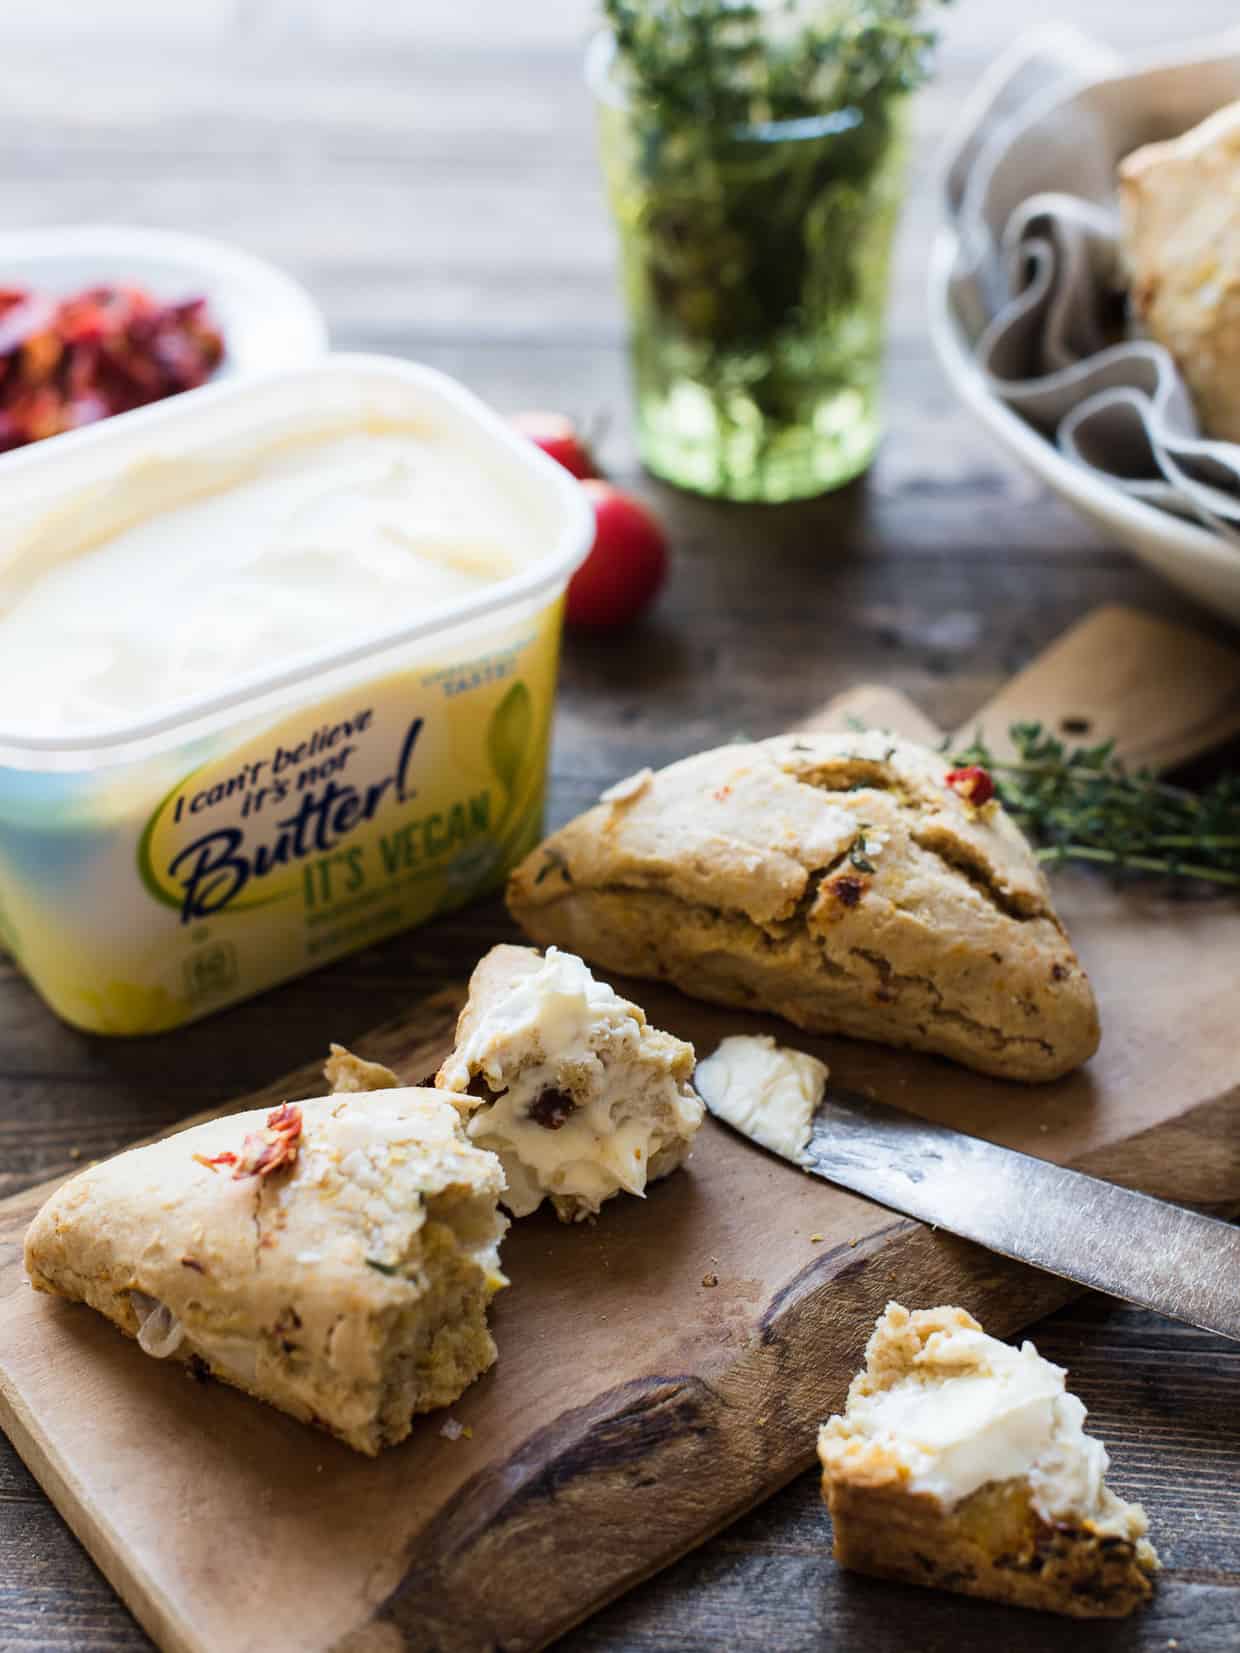 Vegan scones topped with I Can't Believe It's Not Butter! It's Vegan.